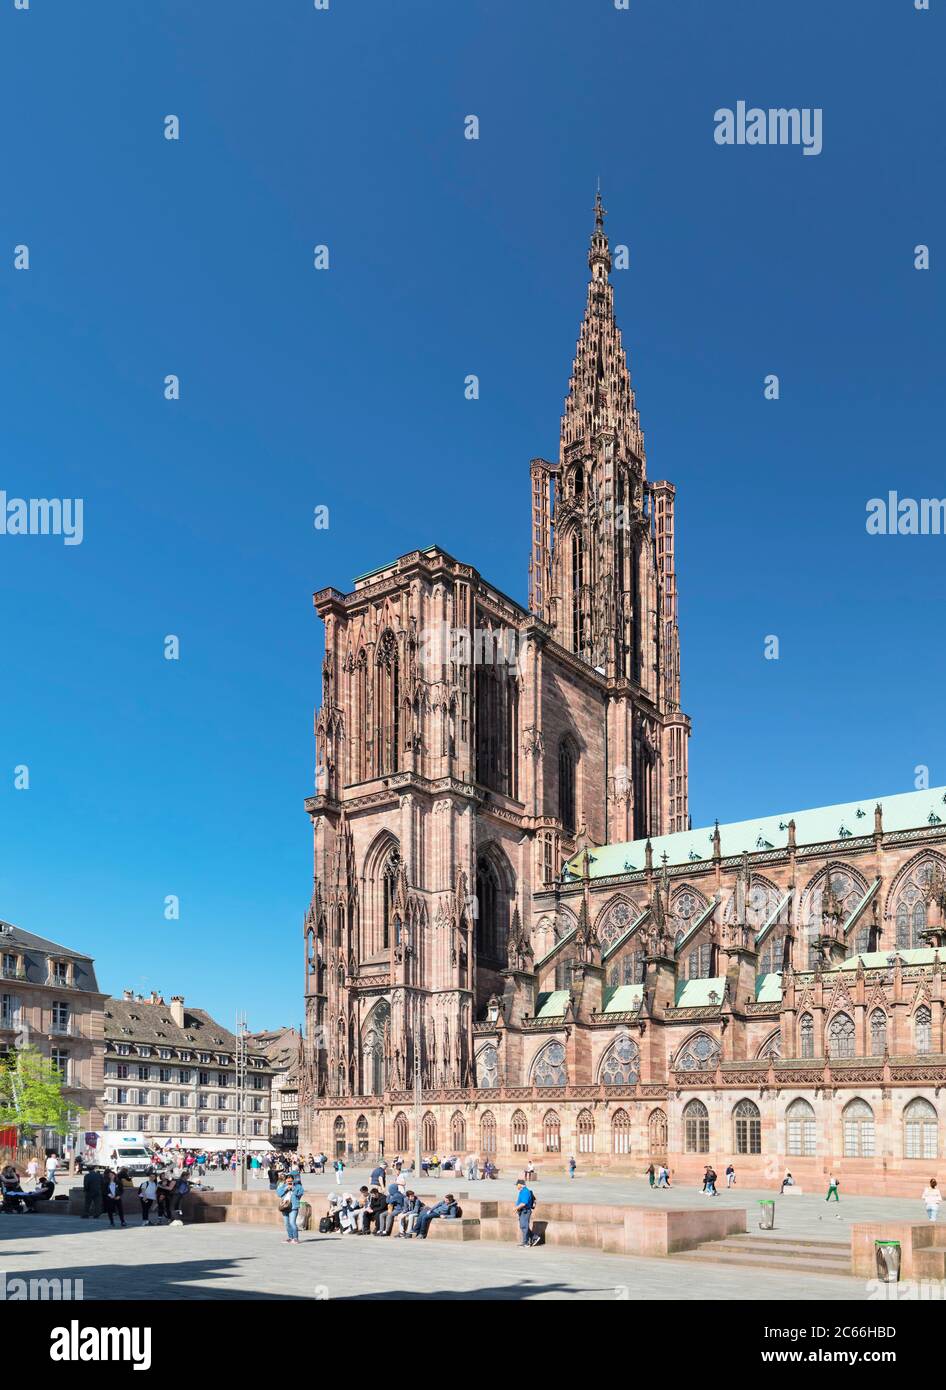 Place de la Cathédrale and Cathedral of Our Lady of Strasbourg, UNESCO World Heritage Site, Strasbourg, Alsace, Grand Est Region, France Stock Photo